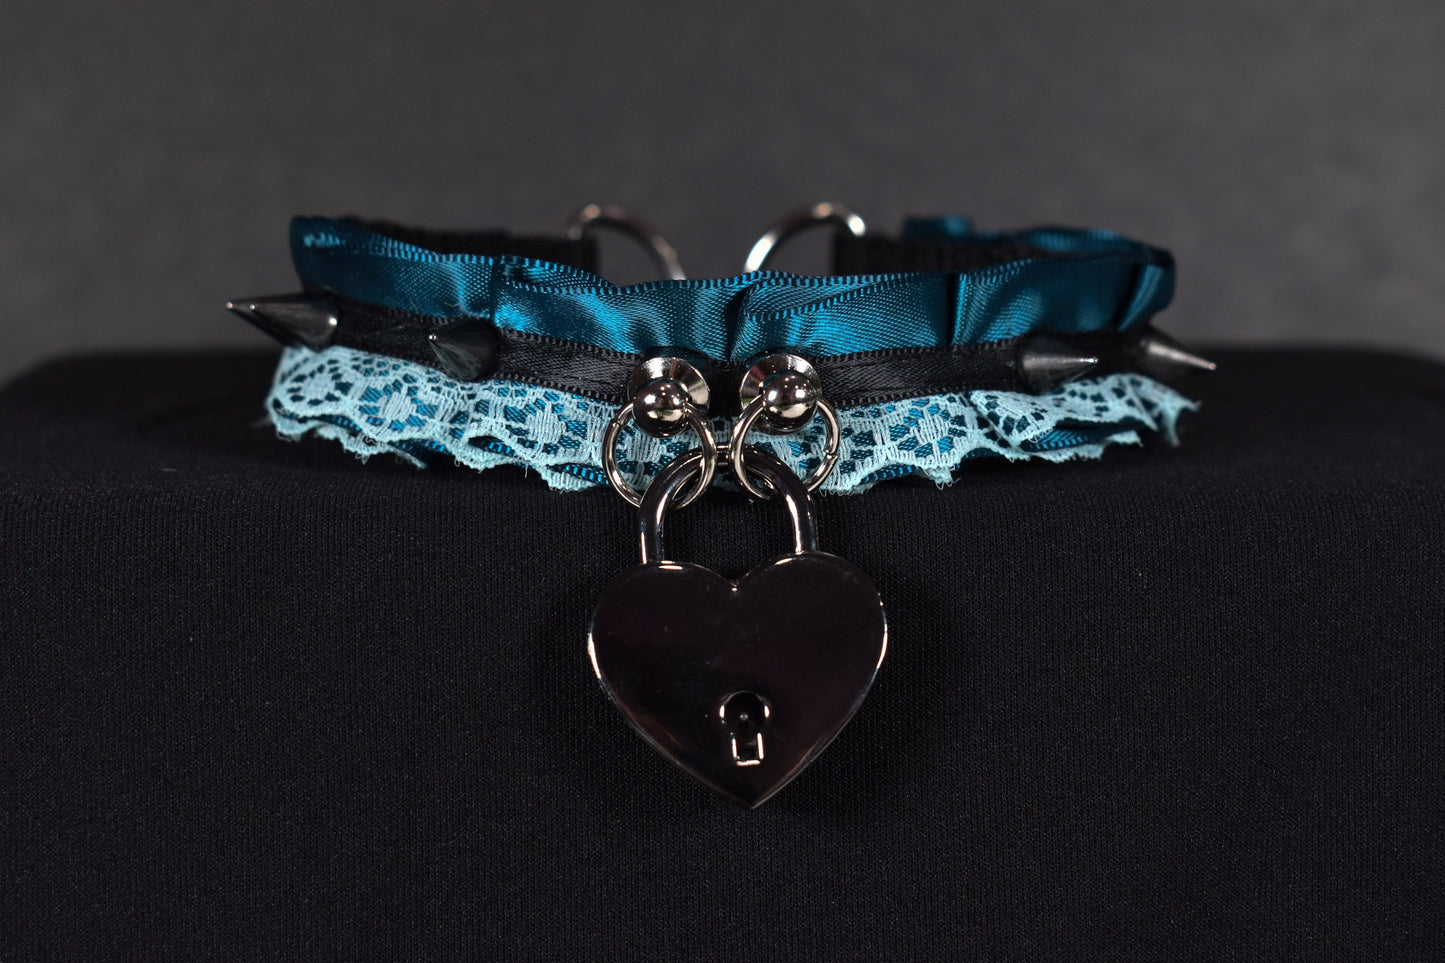 Made to your size / Lock and spikes Blue Choker / kitten play collar / pastel goth /  ddlg / bdsm choker / pet play necklace /